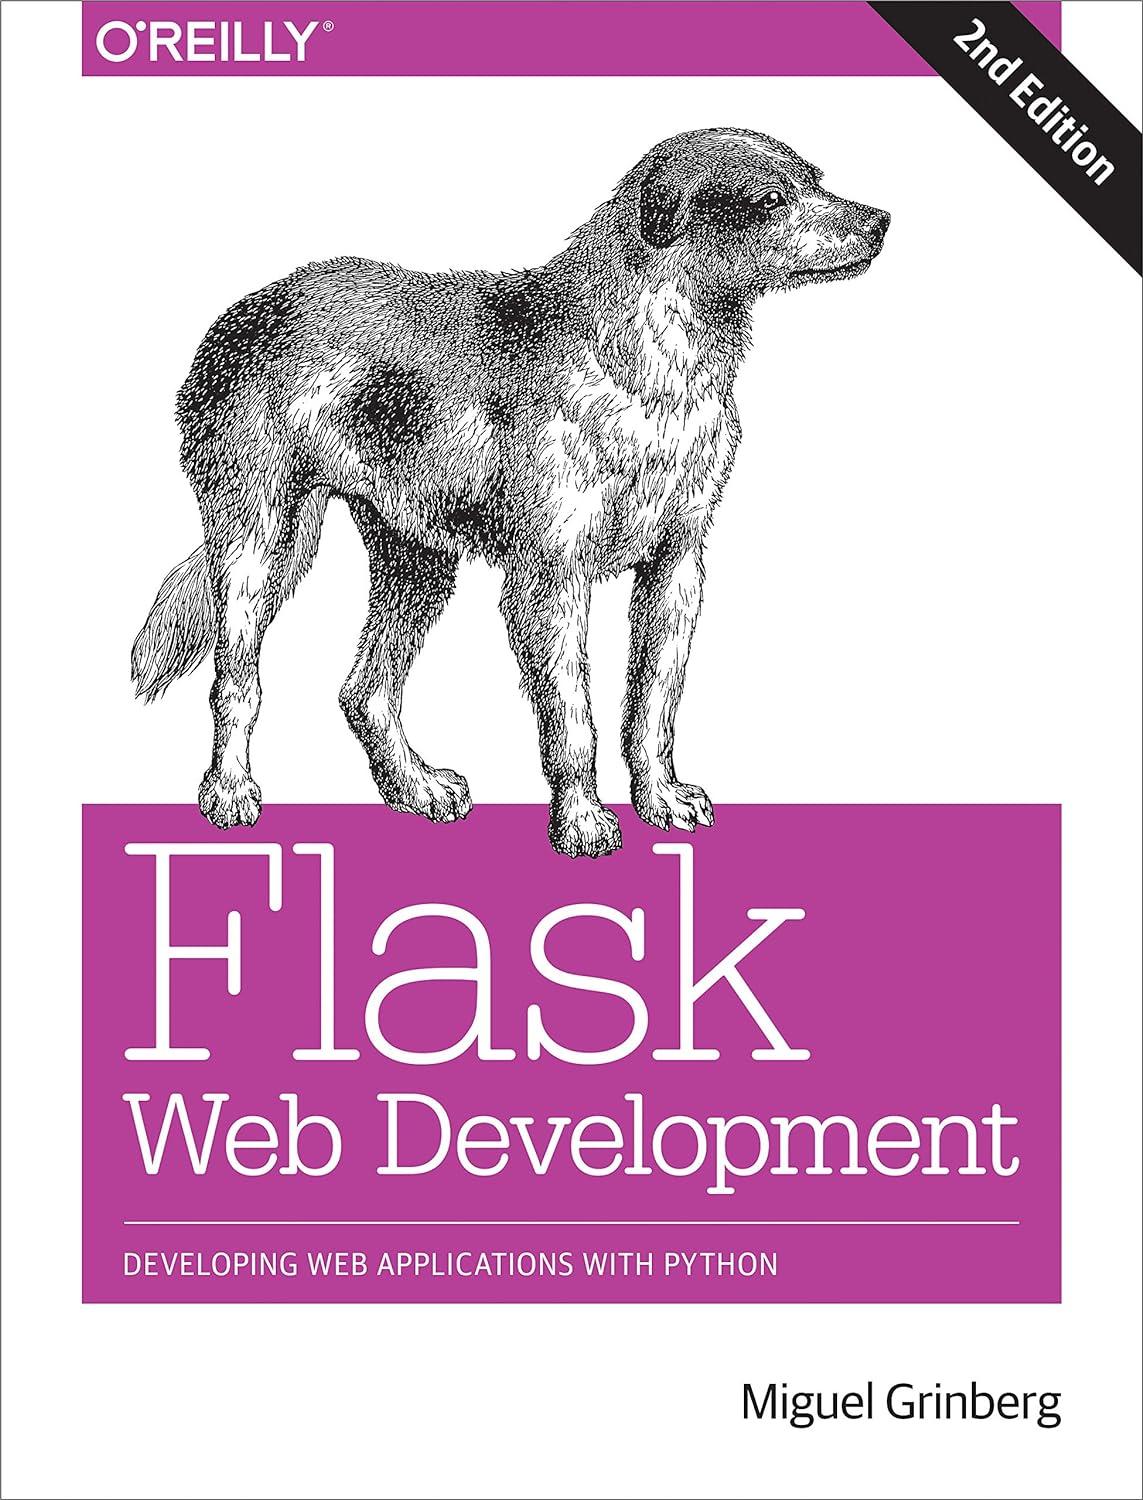 flask web development developing web applications with python 2nd edition miguel grinberg 1491991739,